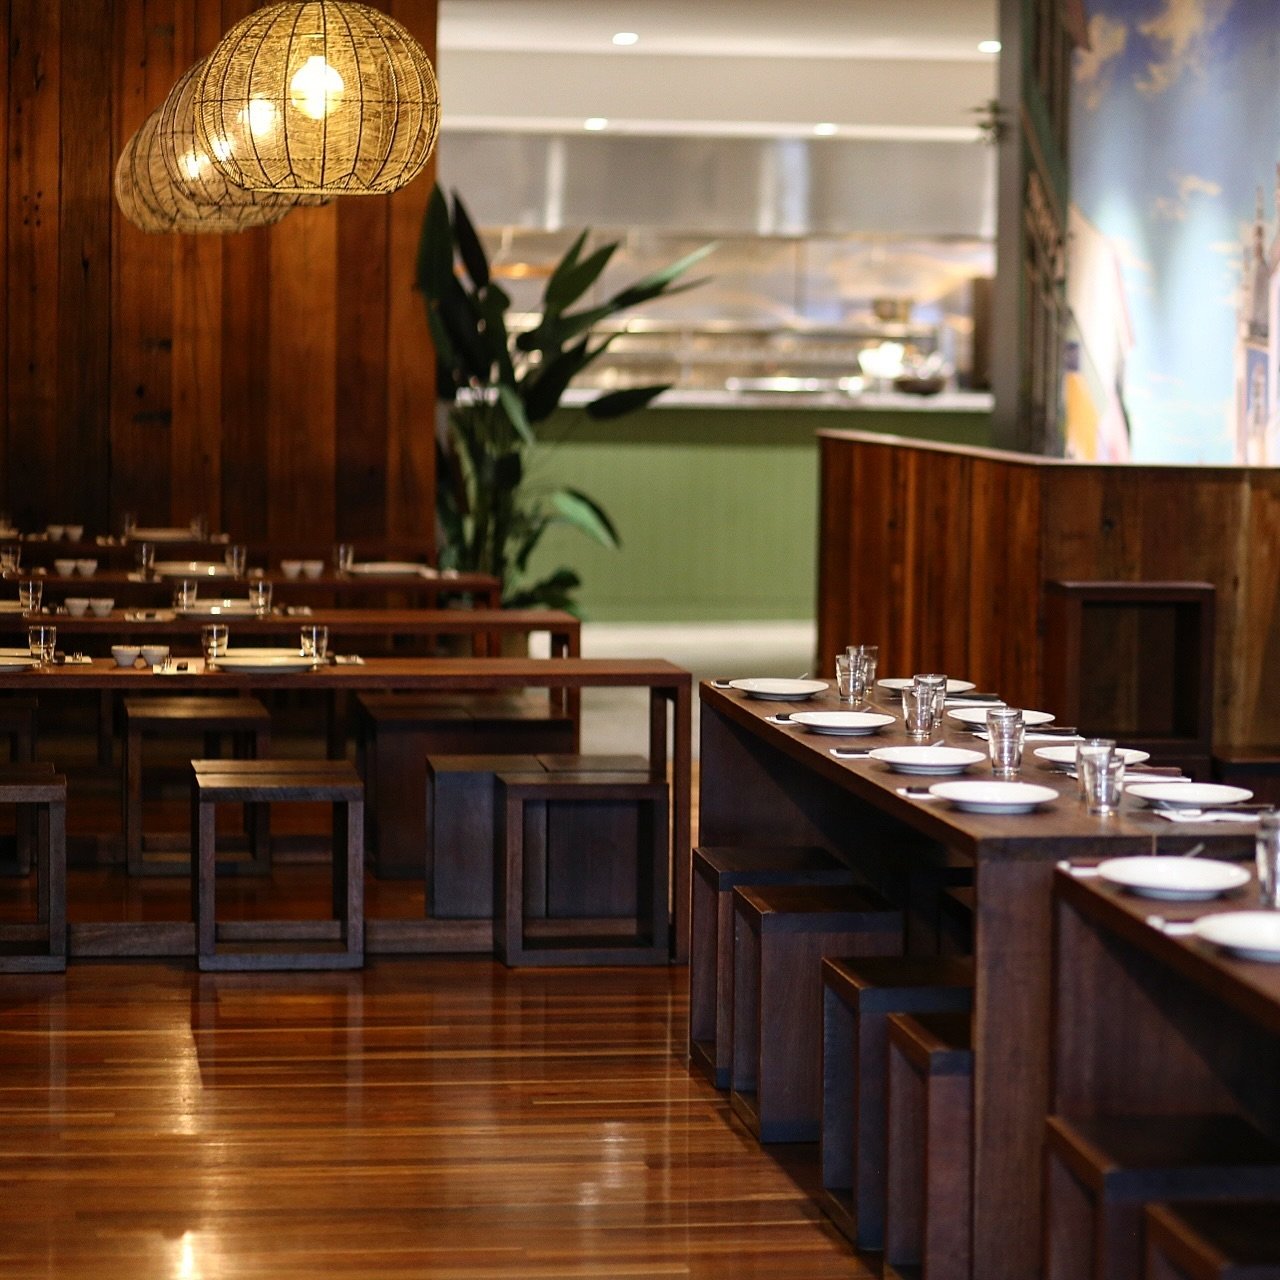 CHURRASCO COOGEE. Welcoming and cozy, with space for any size group. Book your next event online now, www.churrasco.com.au